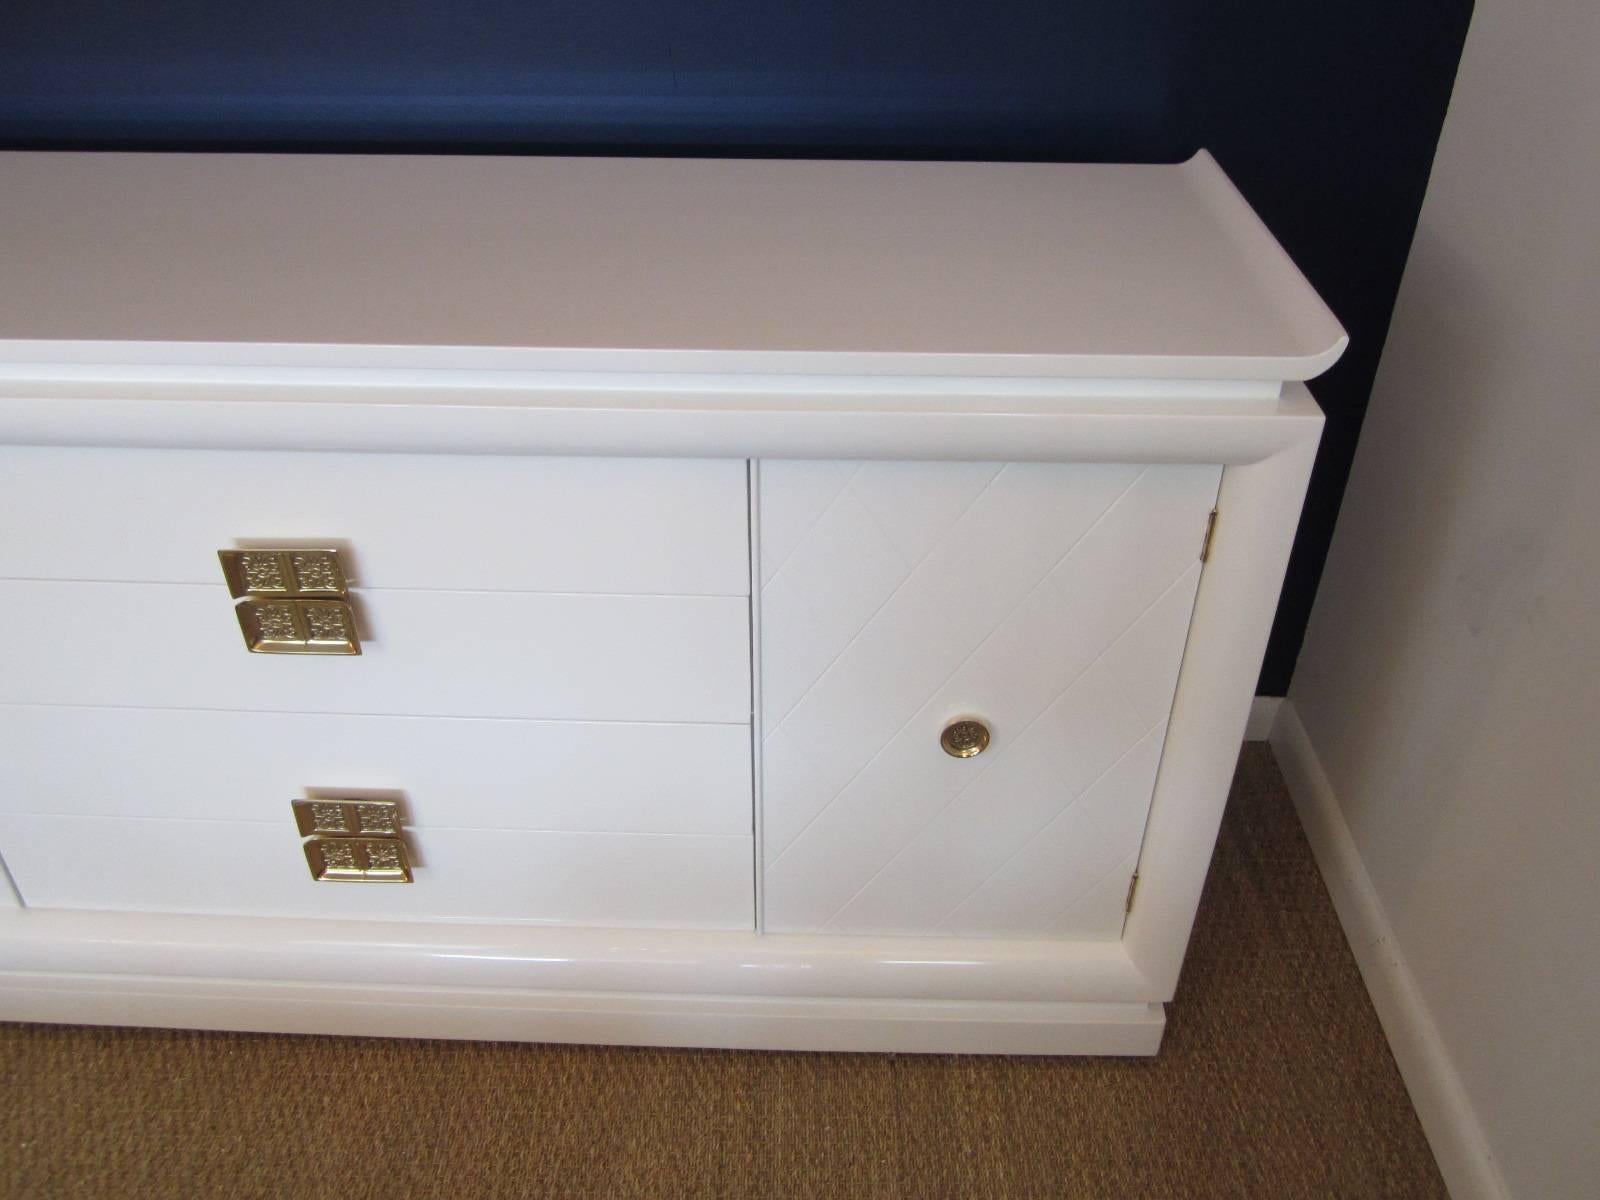 Gorgeous high gloss white lacquered credenza with original polished brass incised hardware on doors and drawers. The doors reveal bottom shelf and adjustable center shelf storage cubbies. Credenza has great 